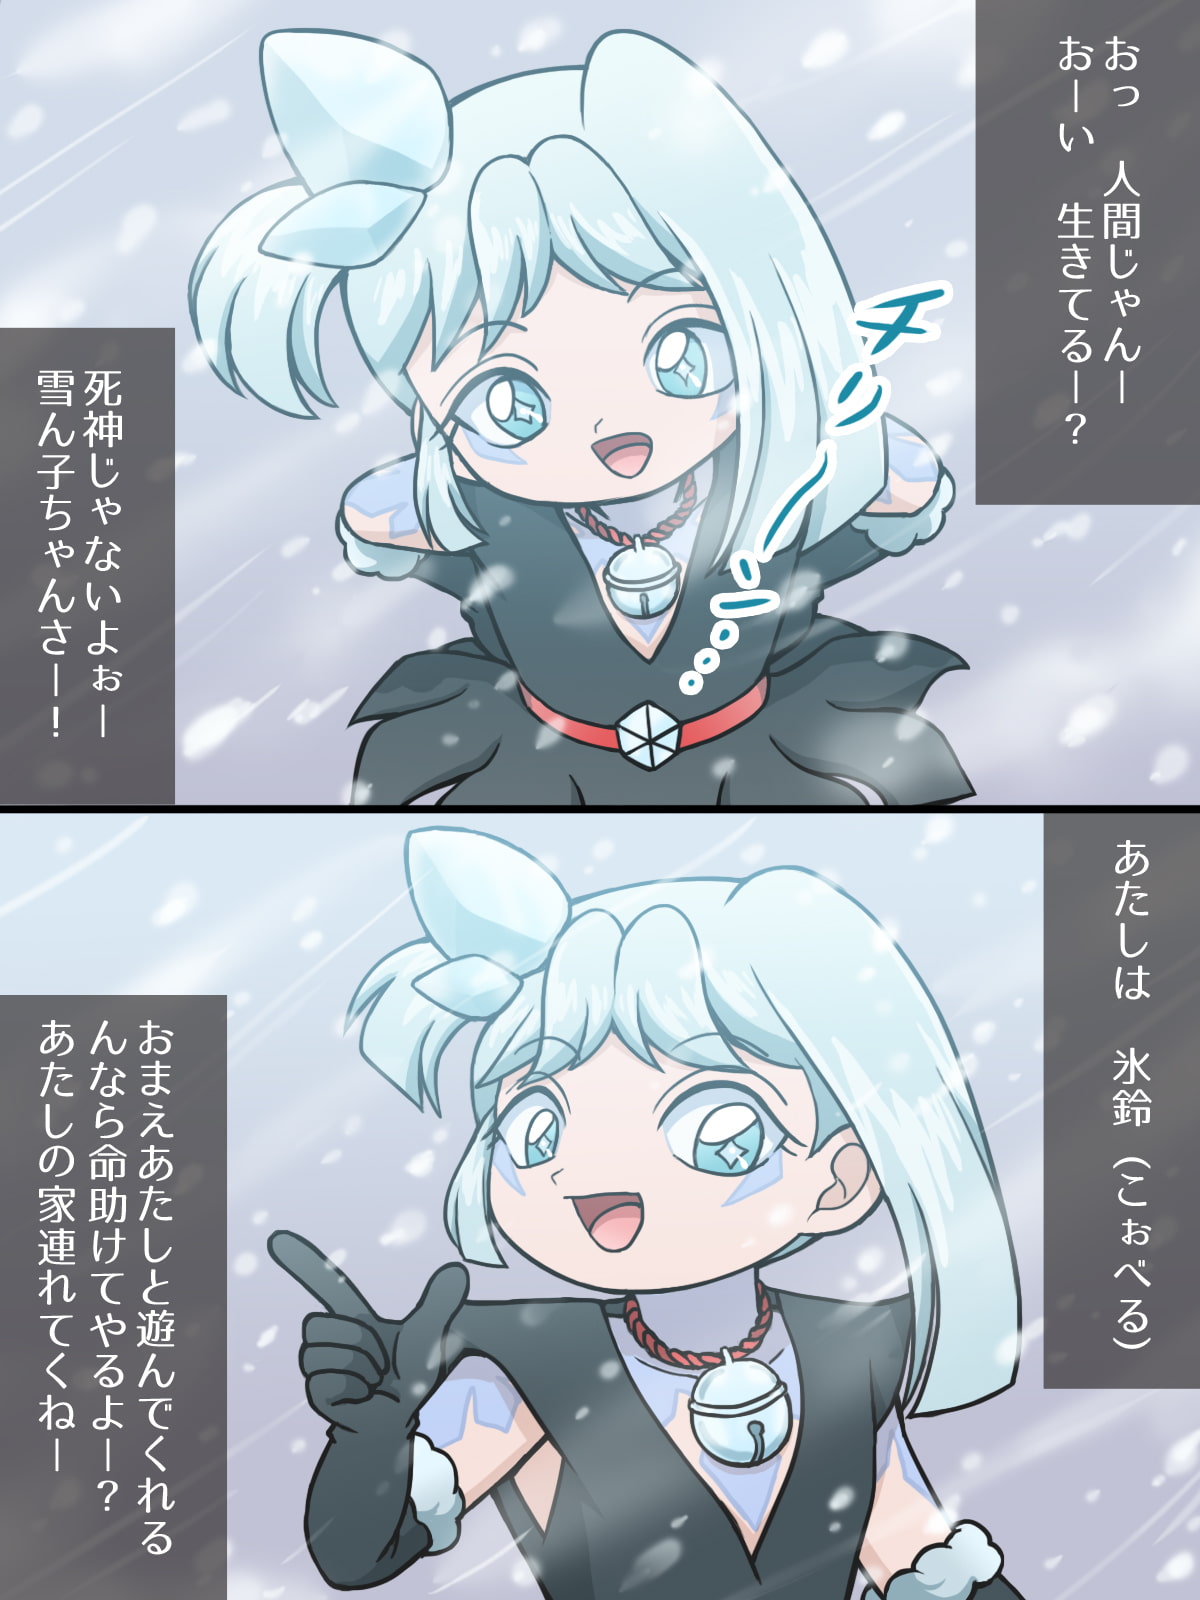 Lewd Snow Play with Frostbell